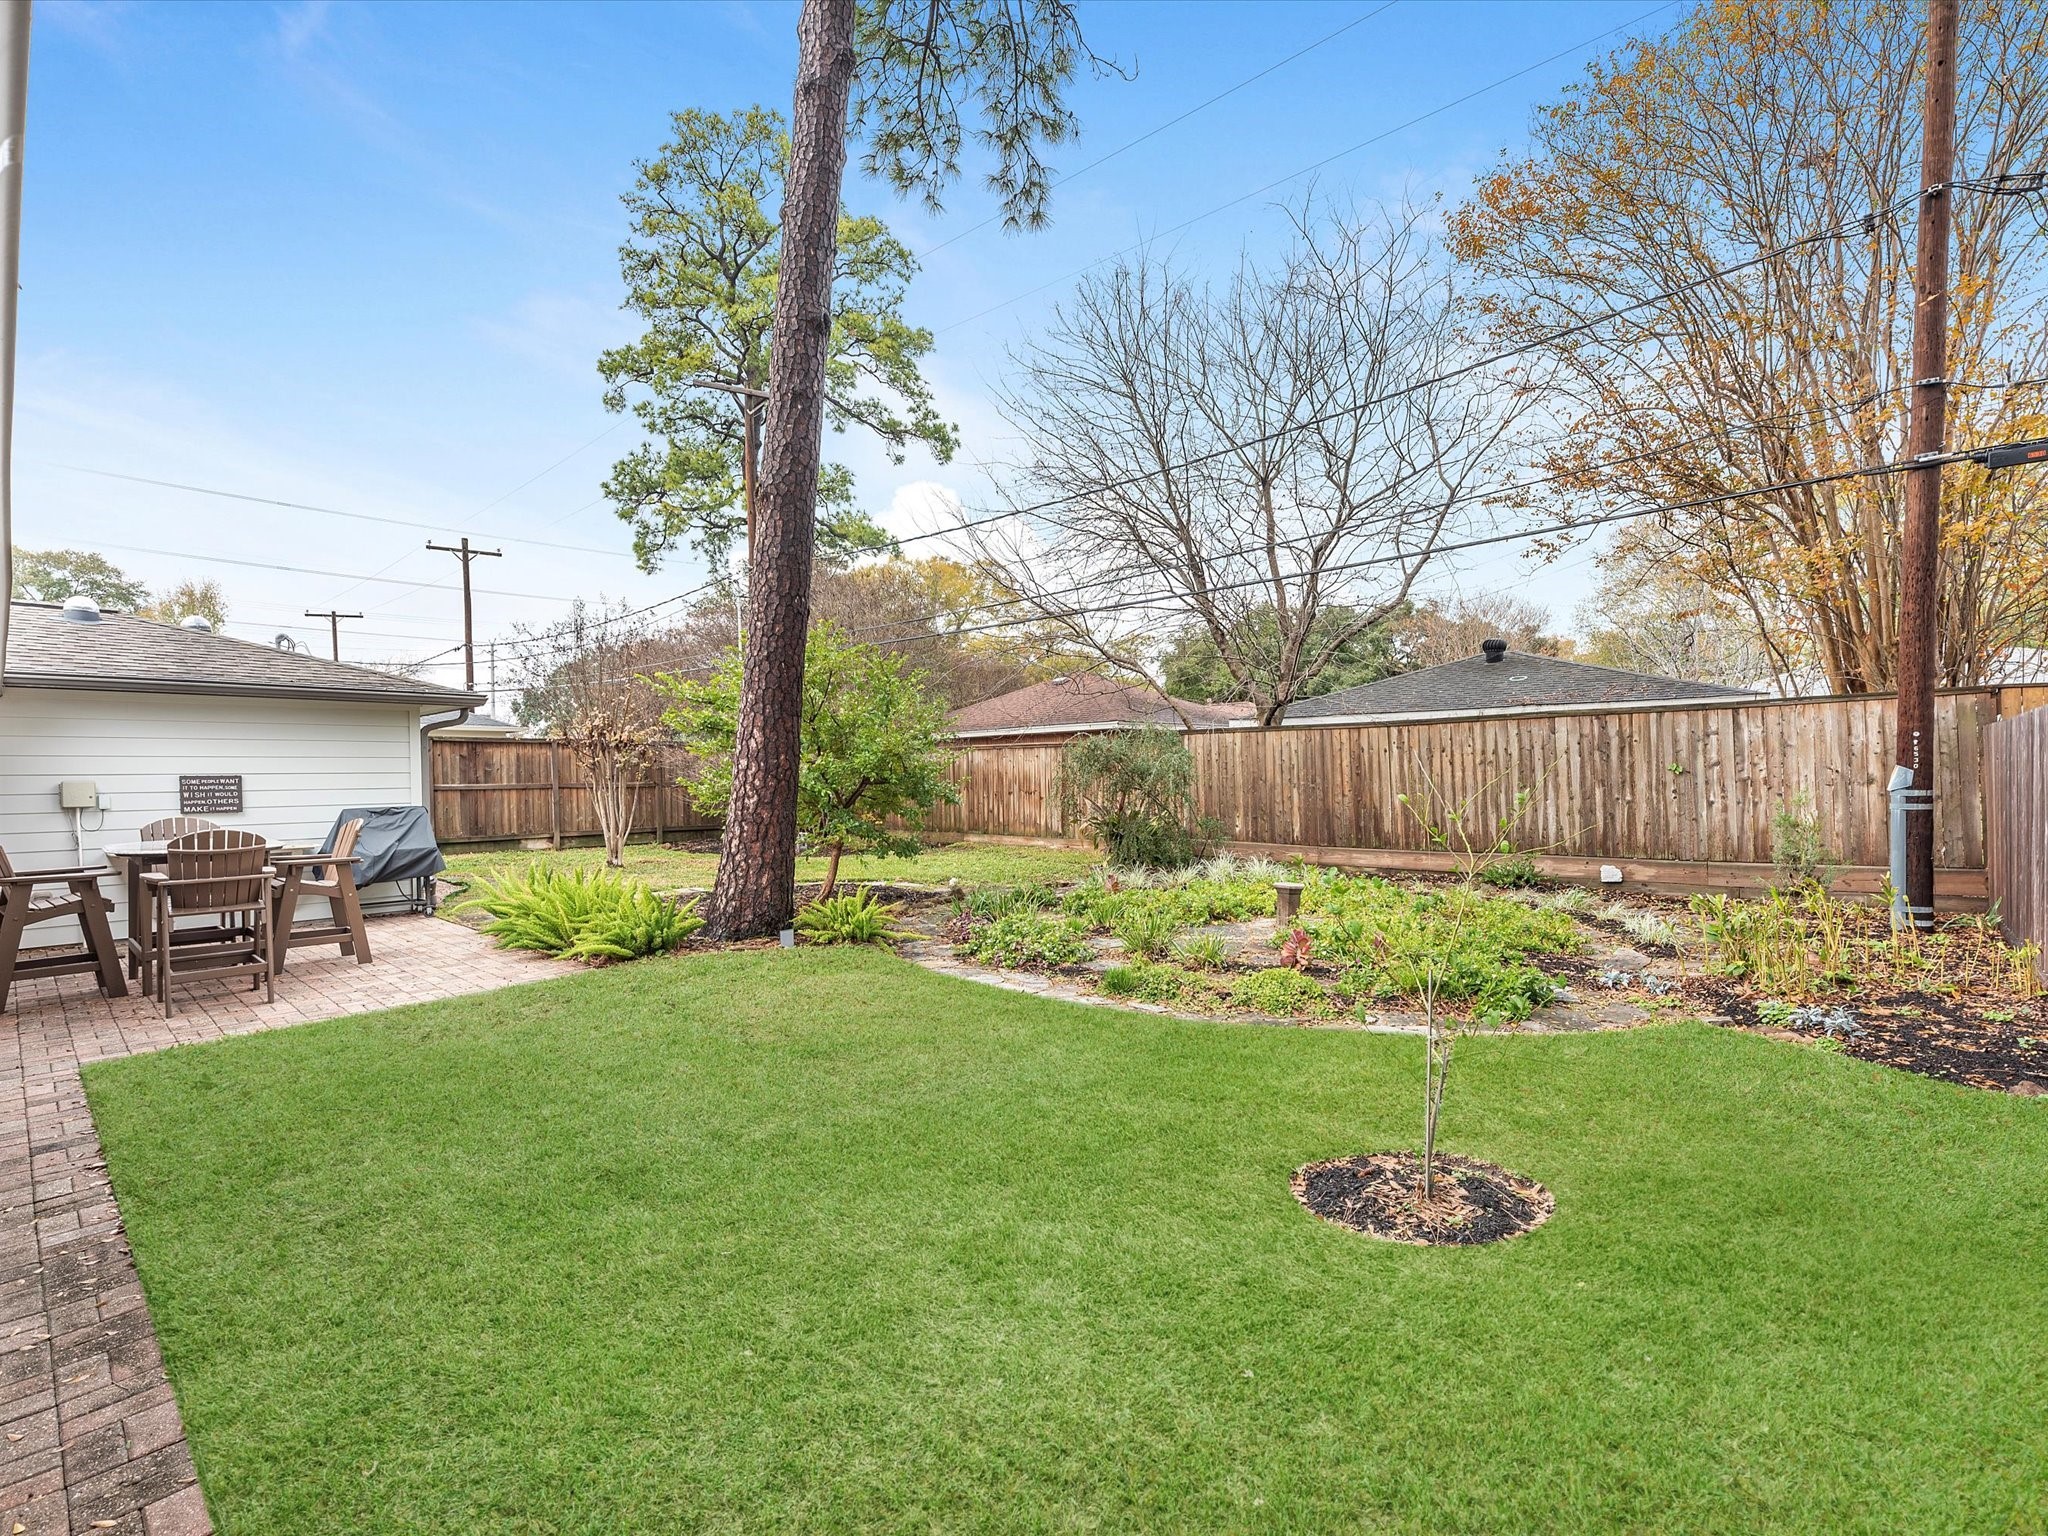 With an 8,775 SF lot there is plenty of backyard! A serene labyrinth walking trail is seen in the background here, with room to spare for a pool, playset, garden, etc!